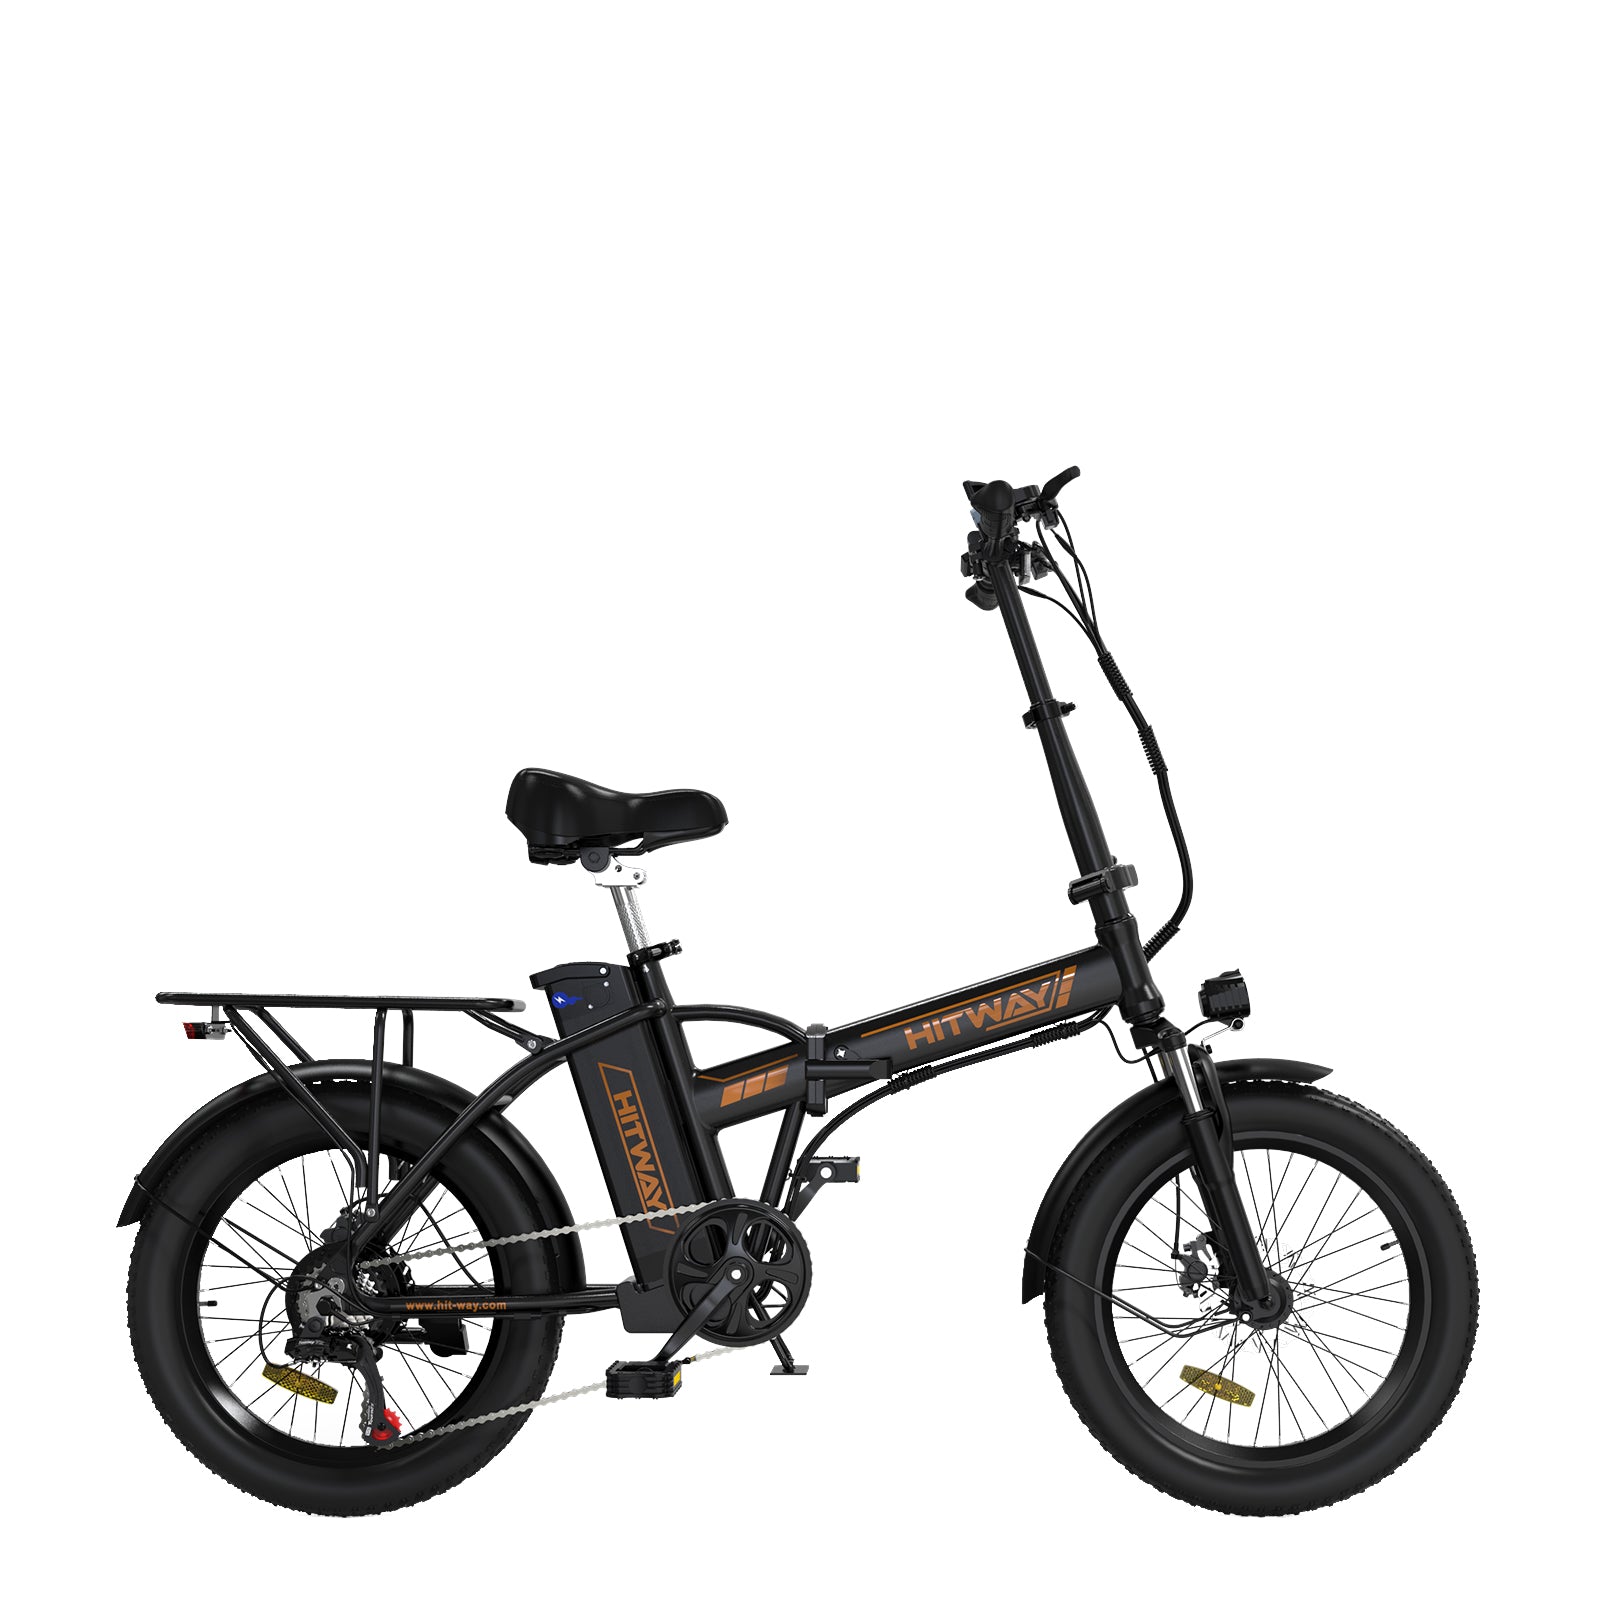 HITWAY BK11 36V 11.2AH Folding Electric Bike 20*3.0 Fat Tire Ebike Suitable  for Urban and Commuting Use